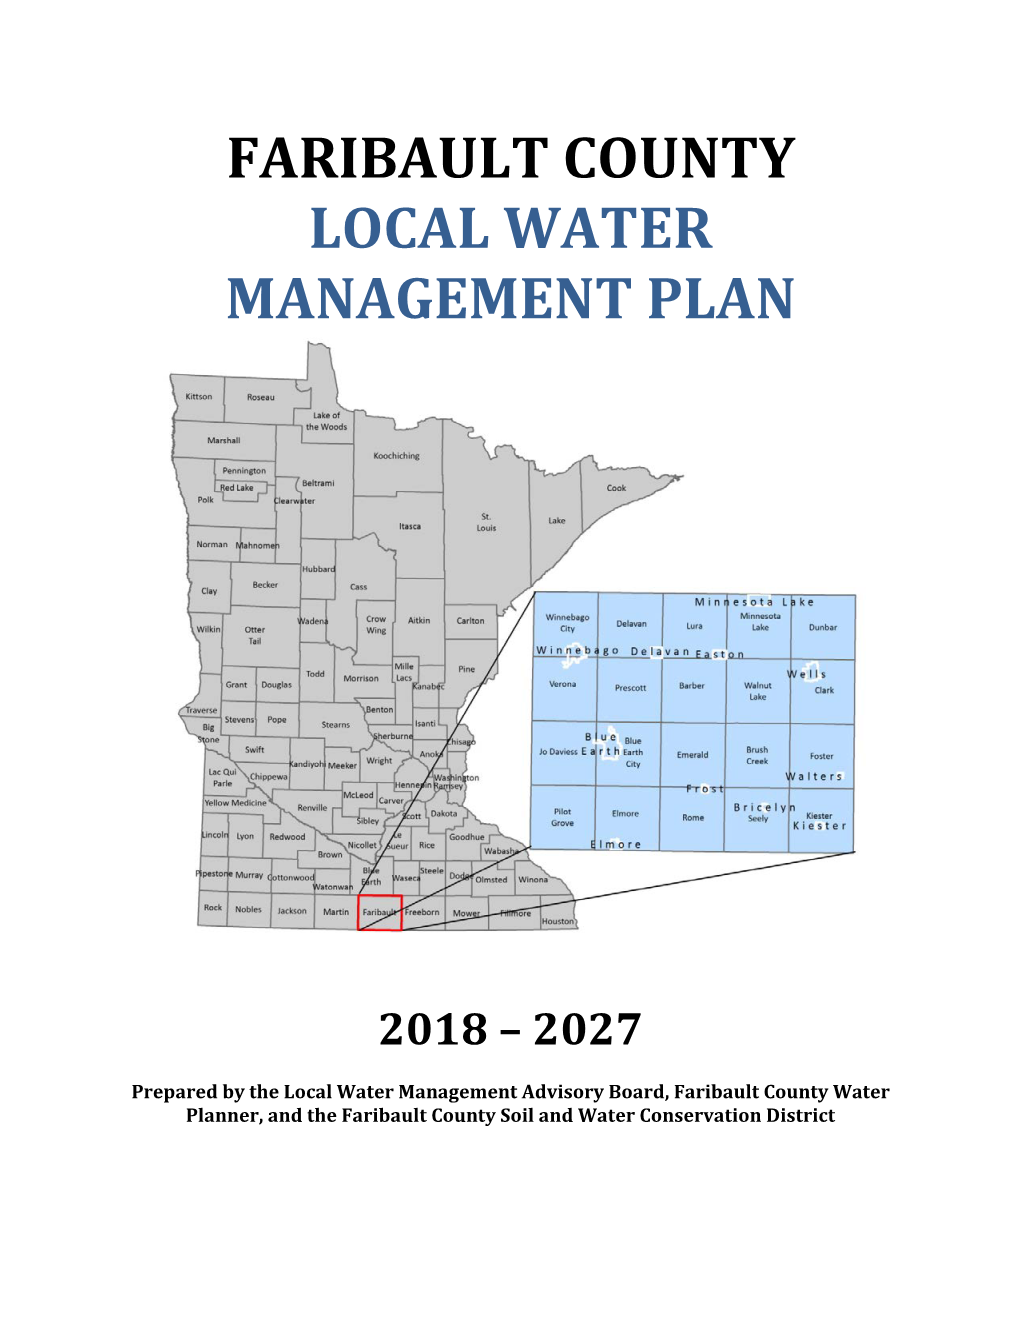 Faribault County Local Water Management Plan 2018-2027